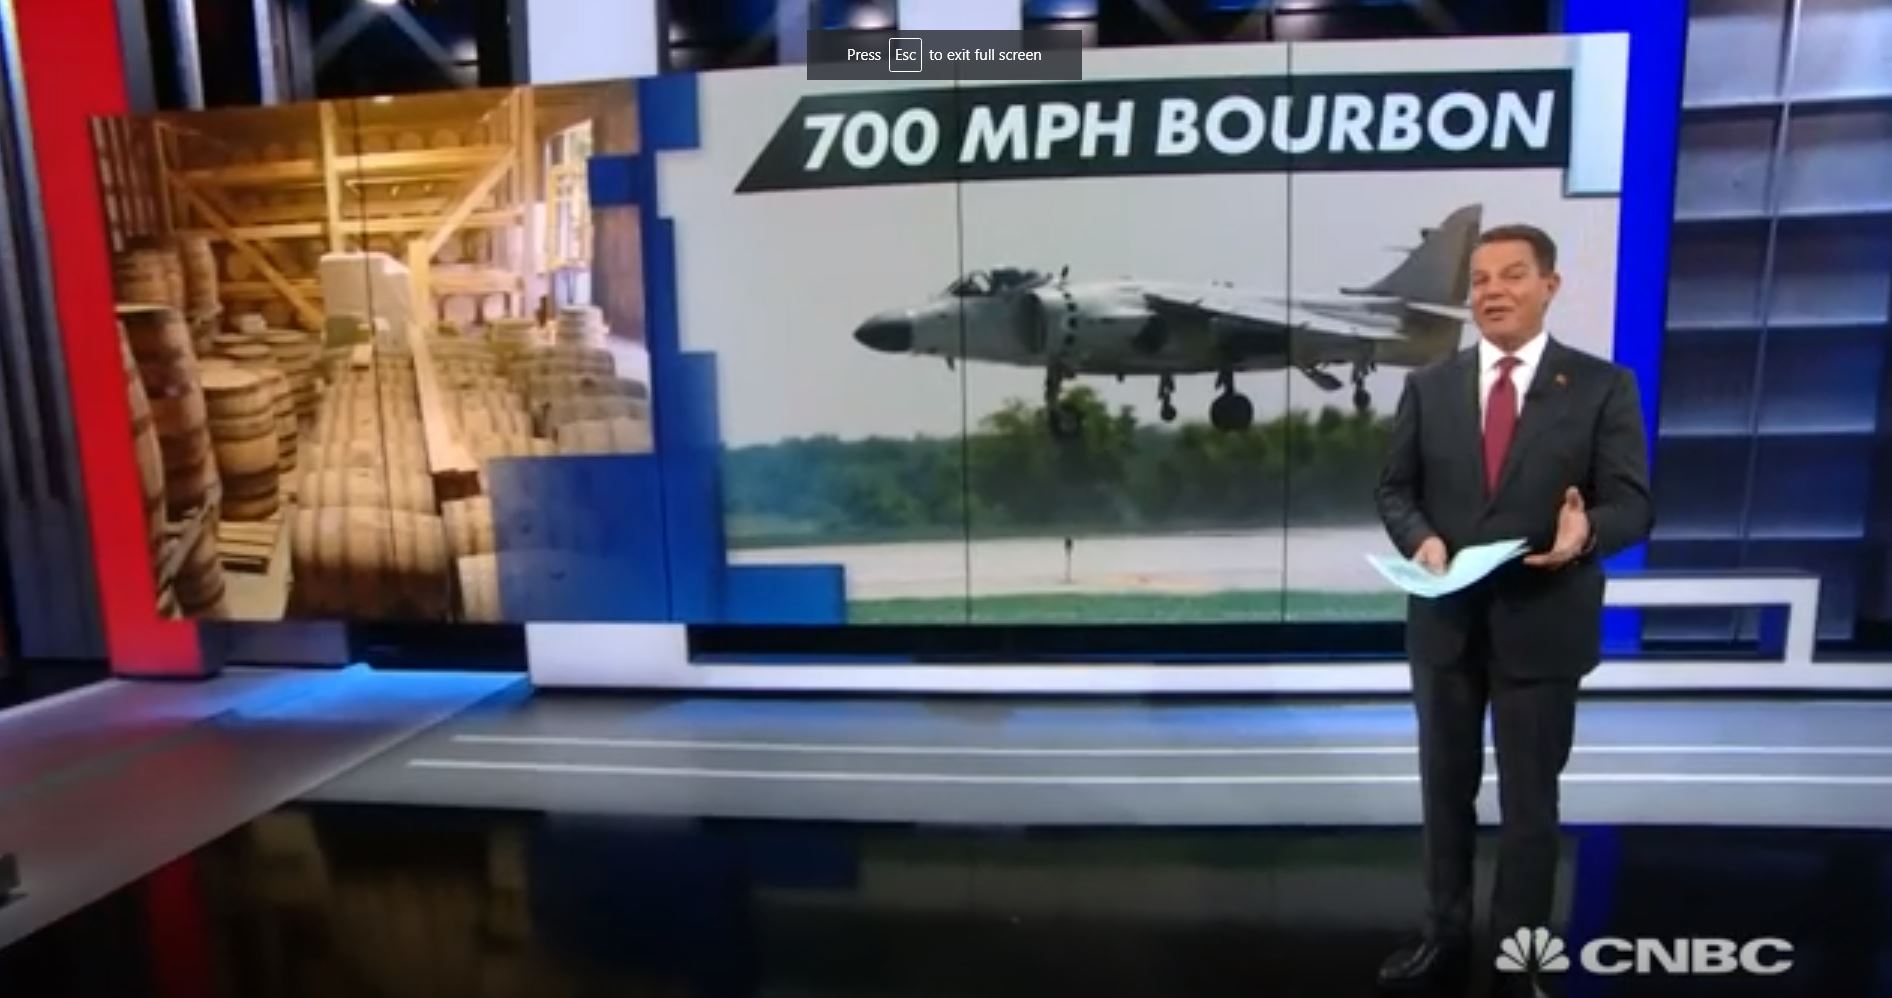 700MPH Bourbon Featured on CNBC